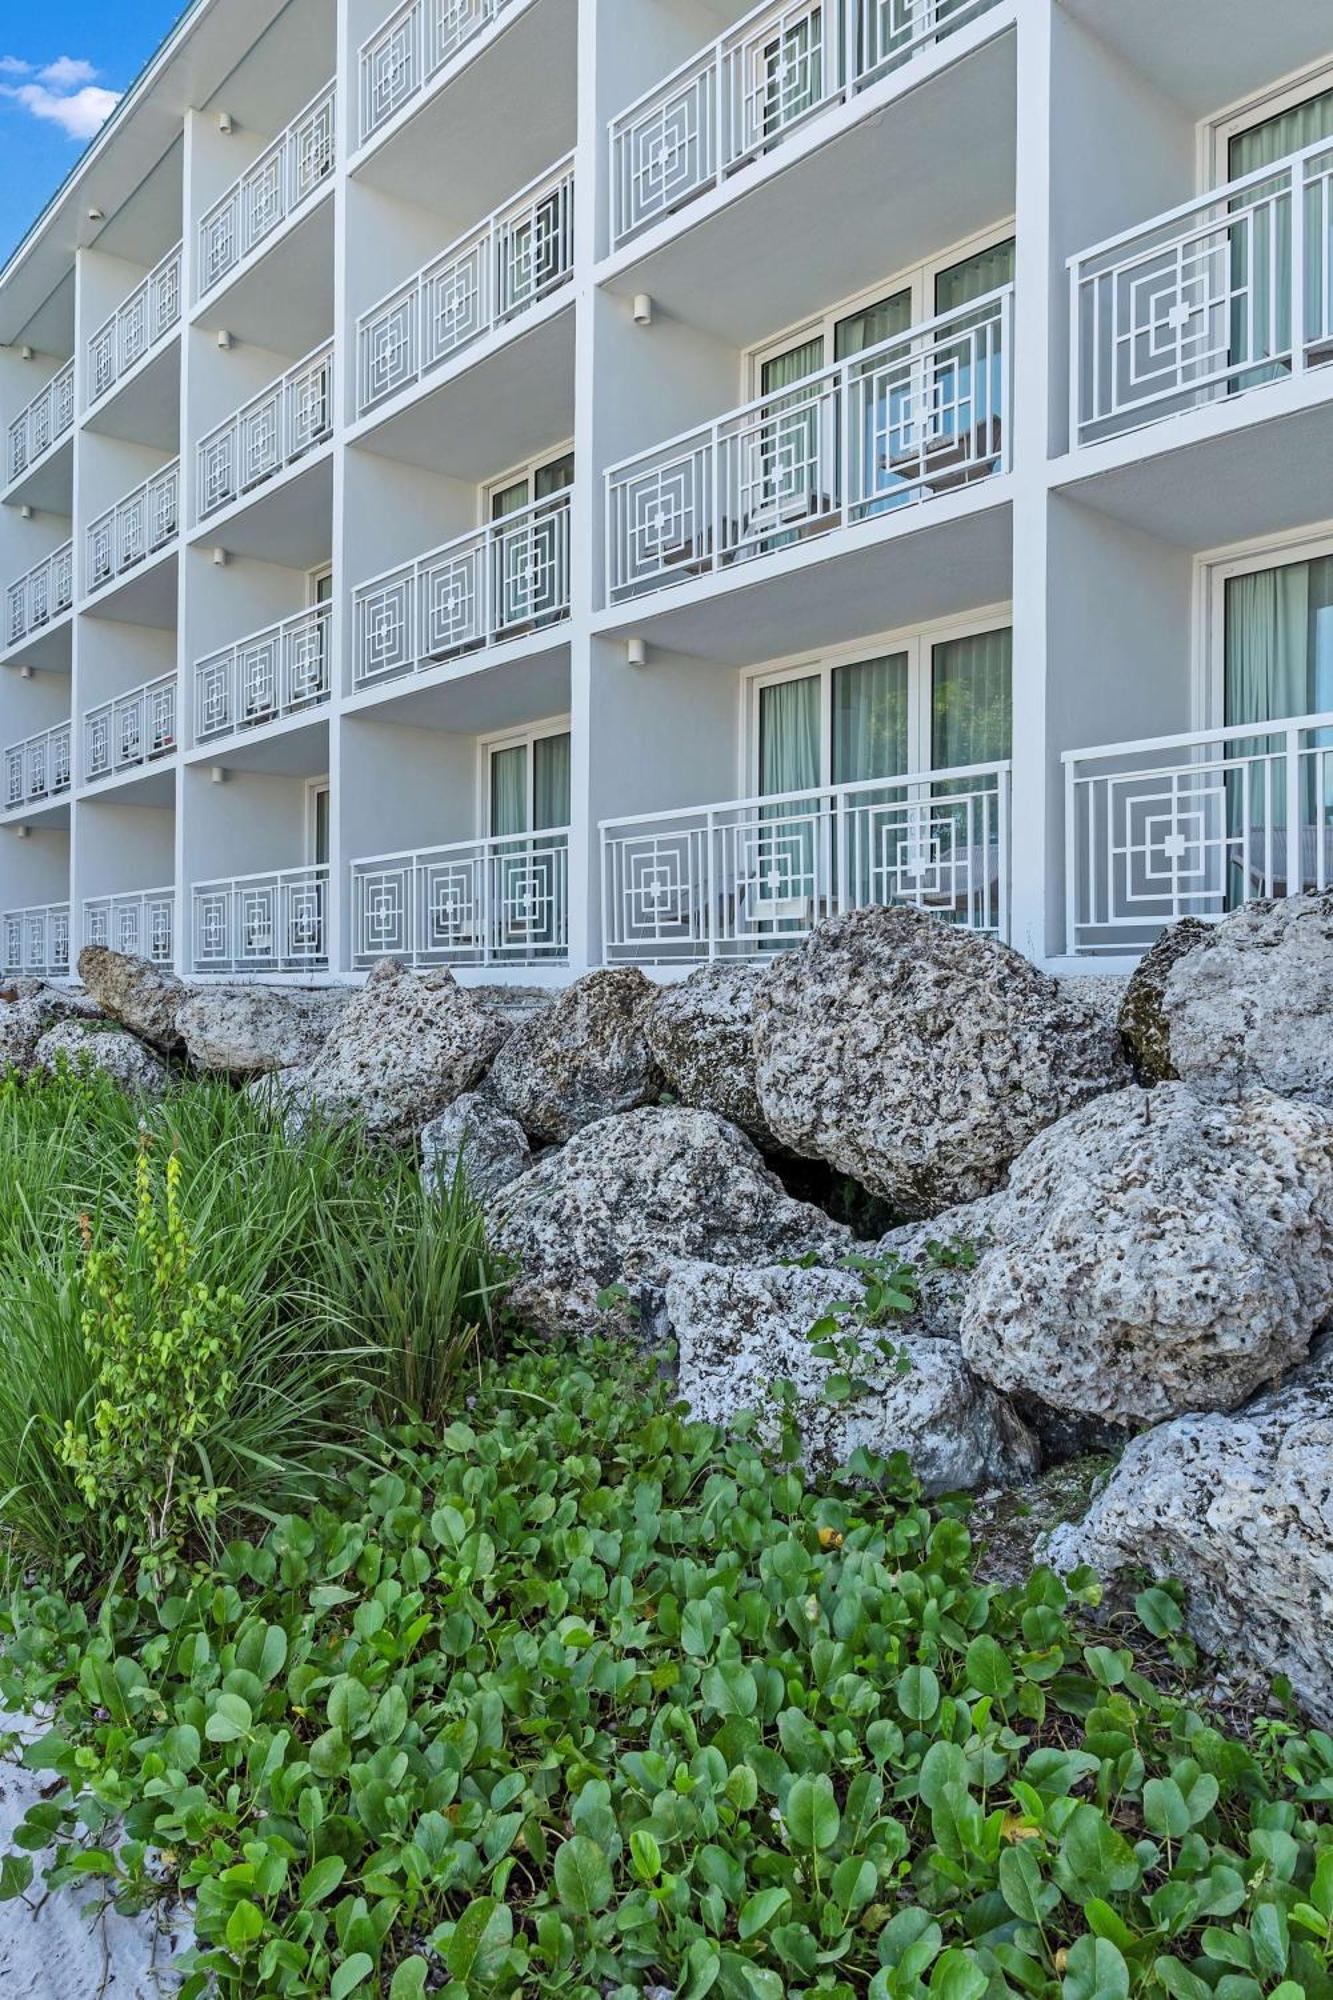 Baker'S Cay Resort Key Largo, Curio Collection By Hilton Exterior photo